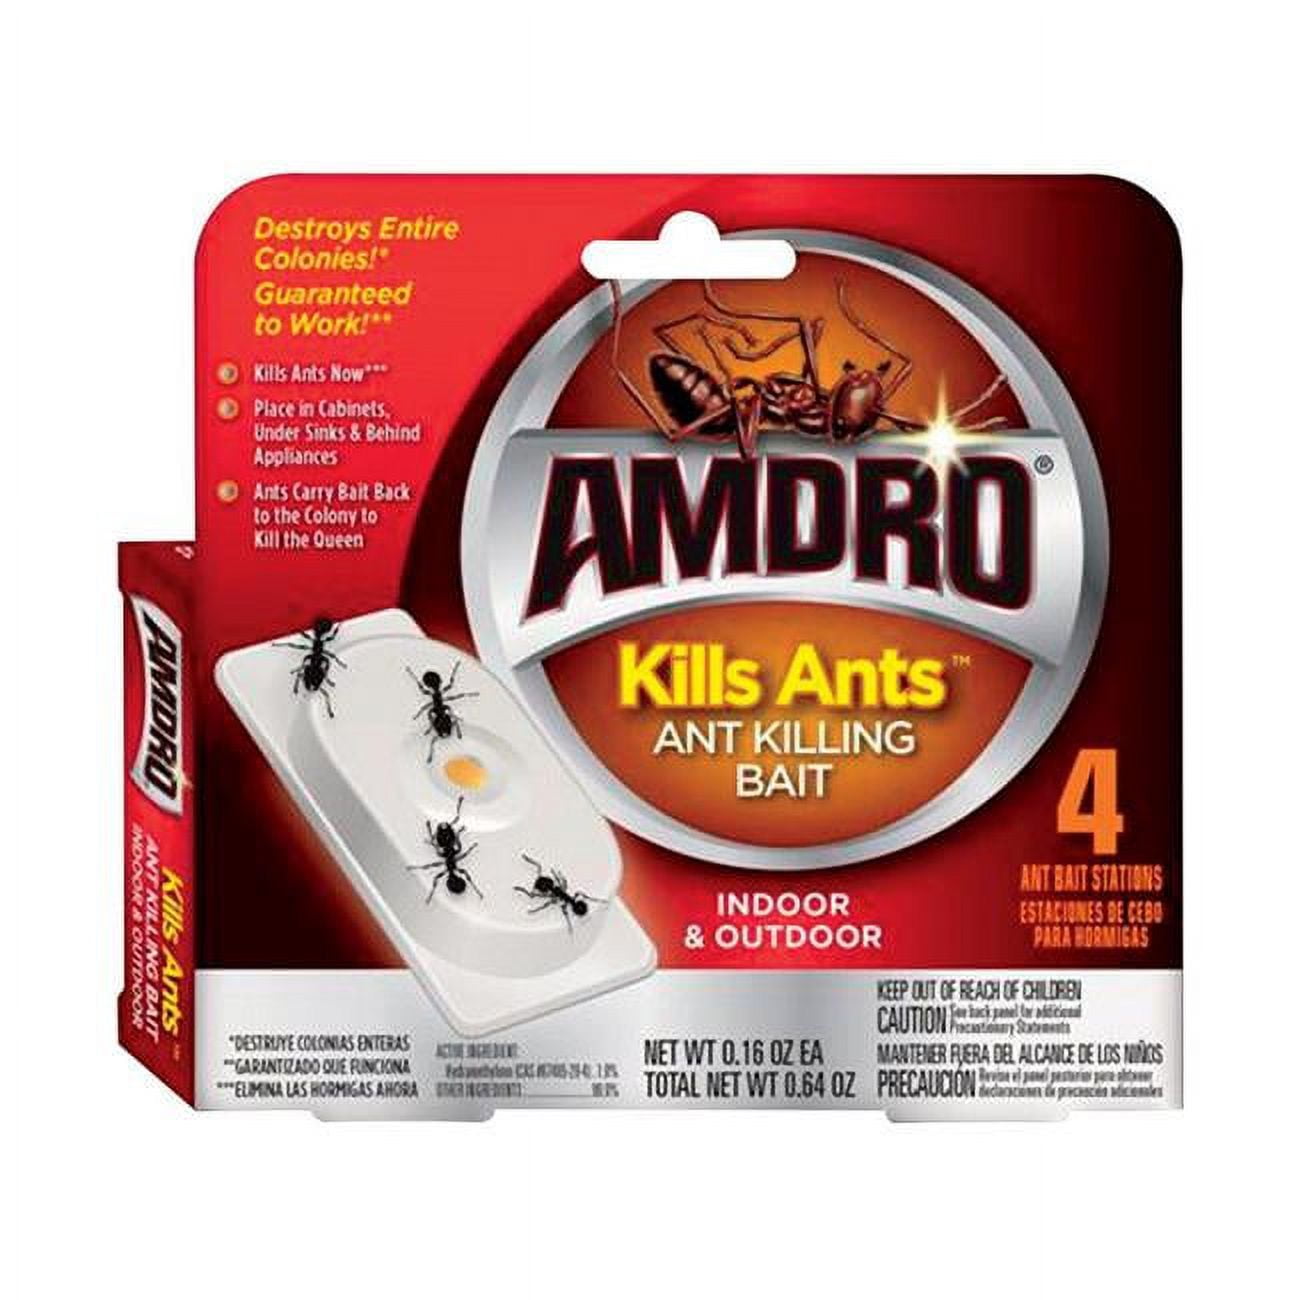 cynthia zgheib recommends amdro ant killing bait reviews pic